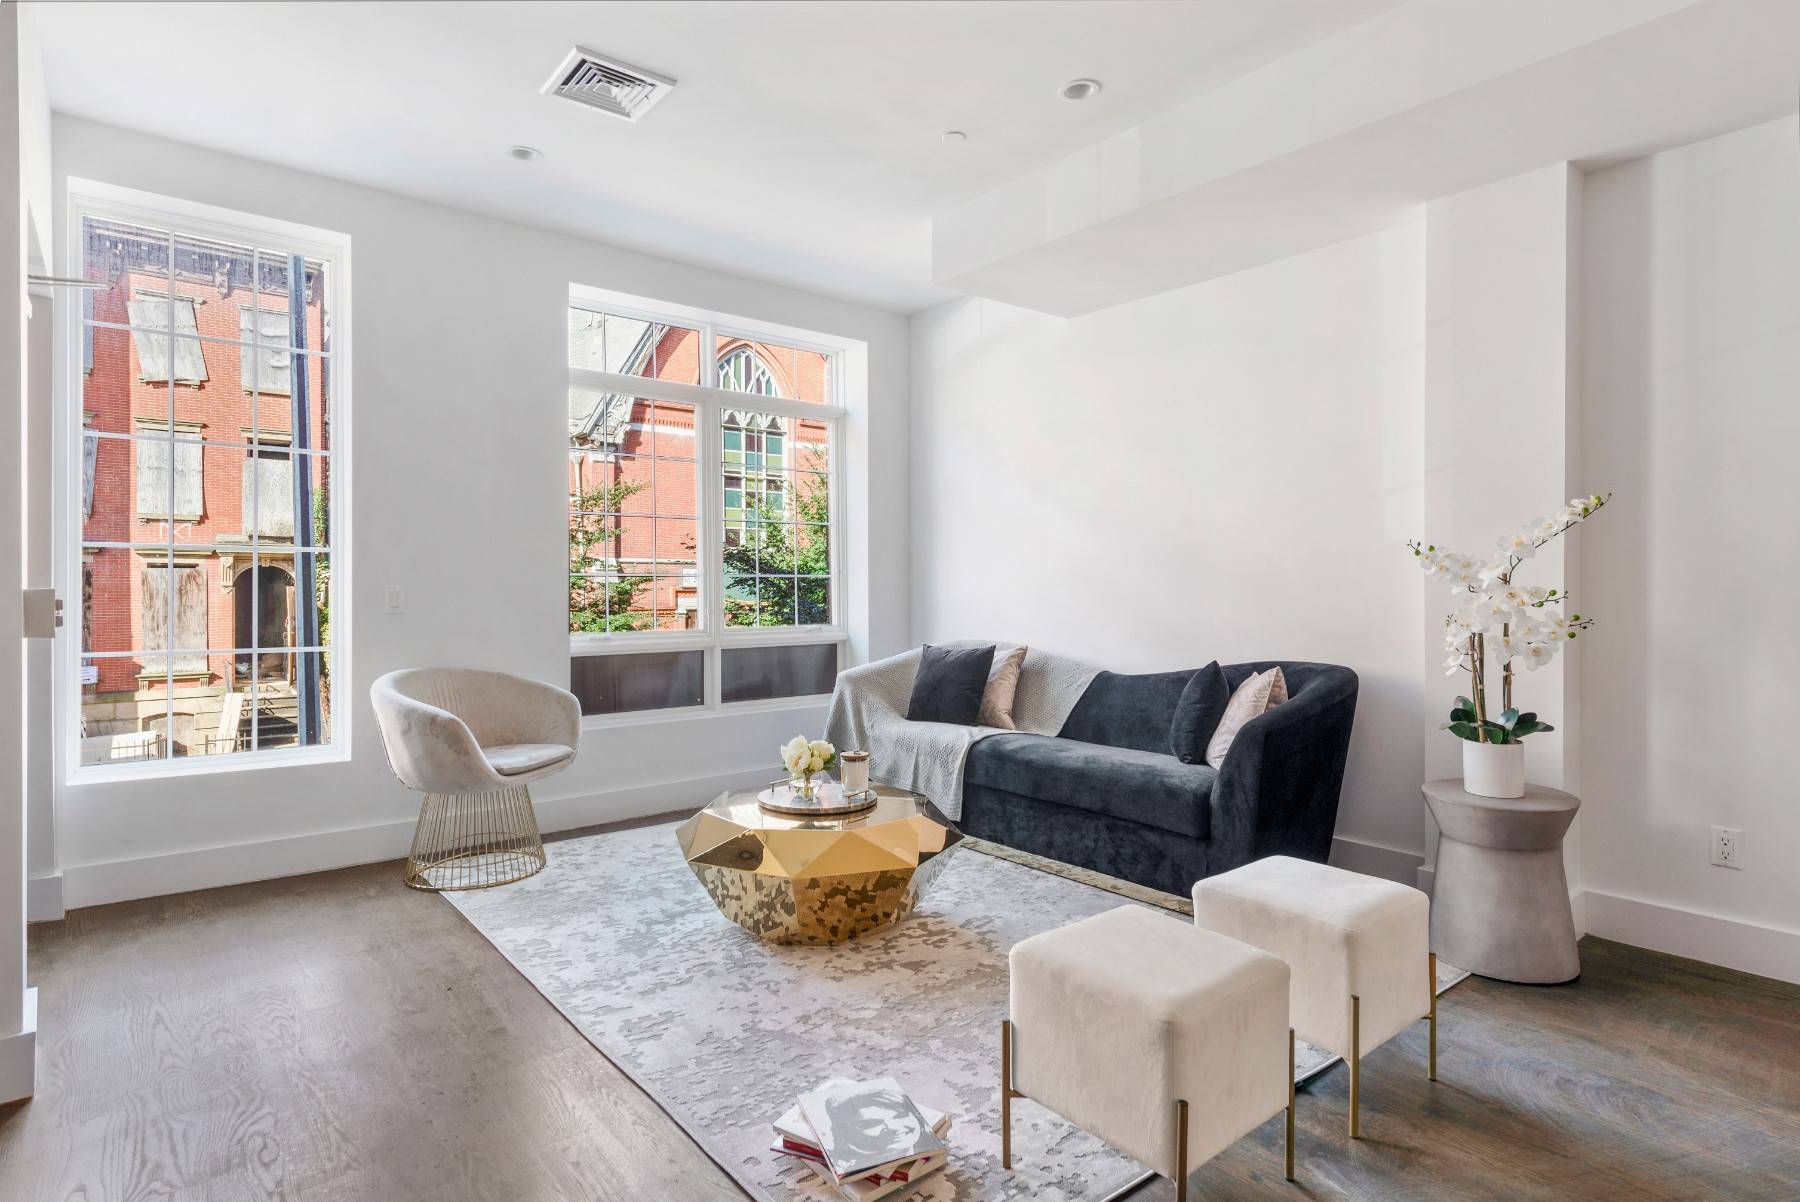 335 341 NOSTRAND OFFER 15 YEAR TAX ABATEMENTLuxury living in trendy, up and coming Brooklyn !